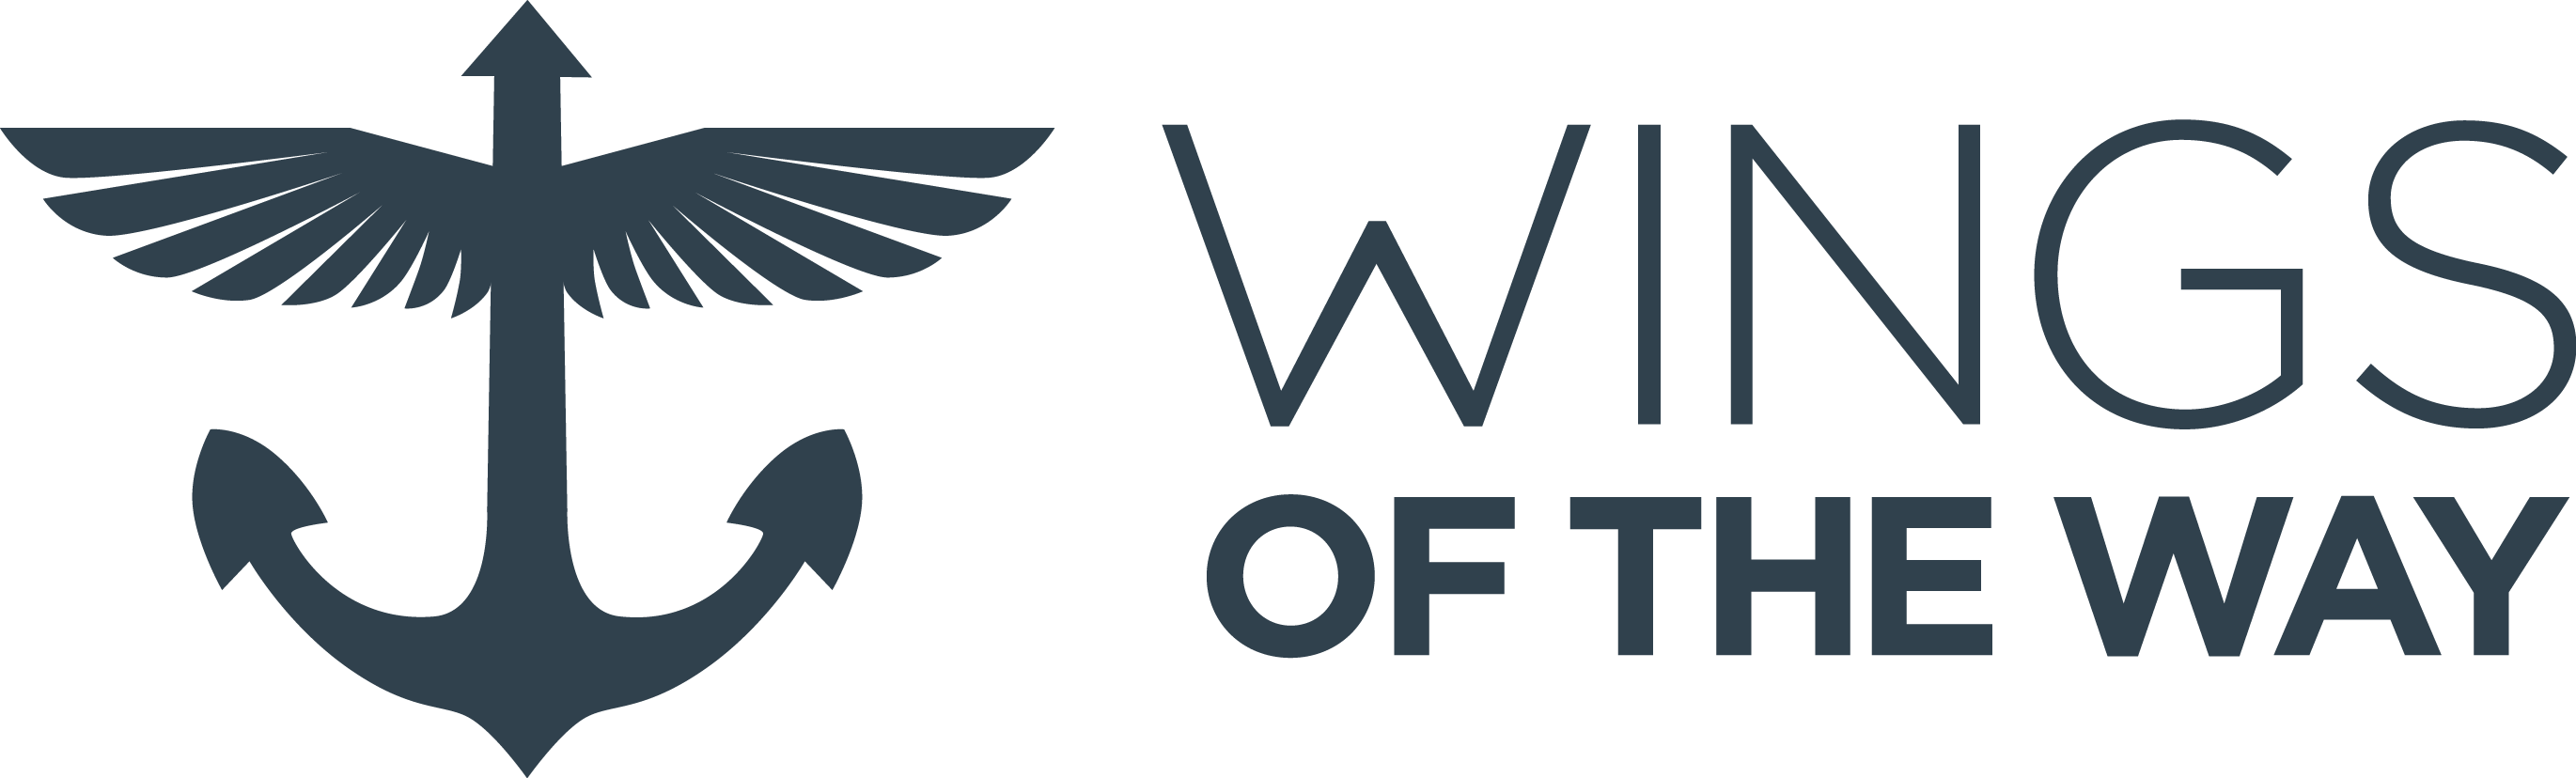 Wings of the Way, Inc. logo